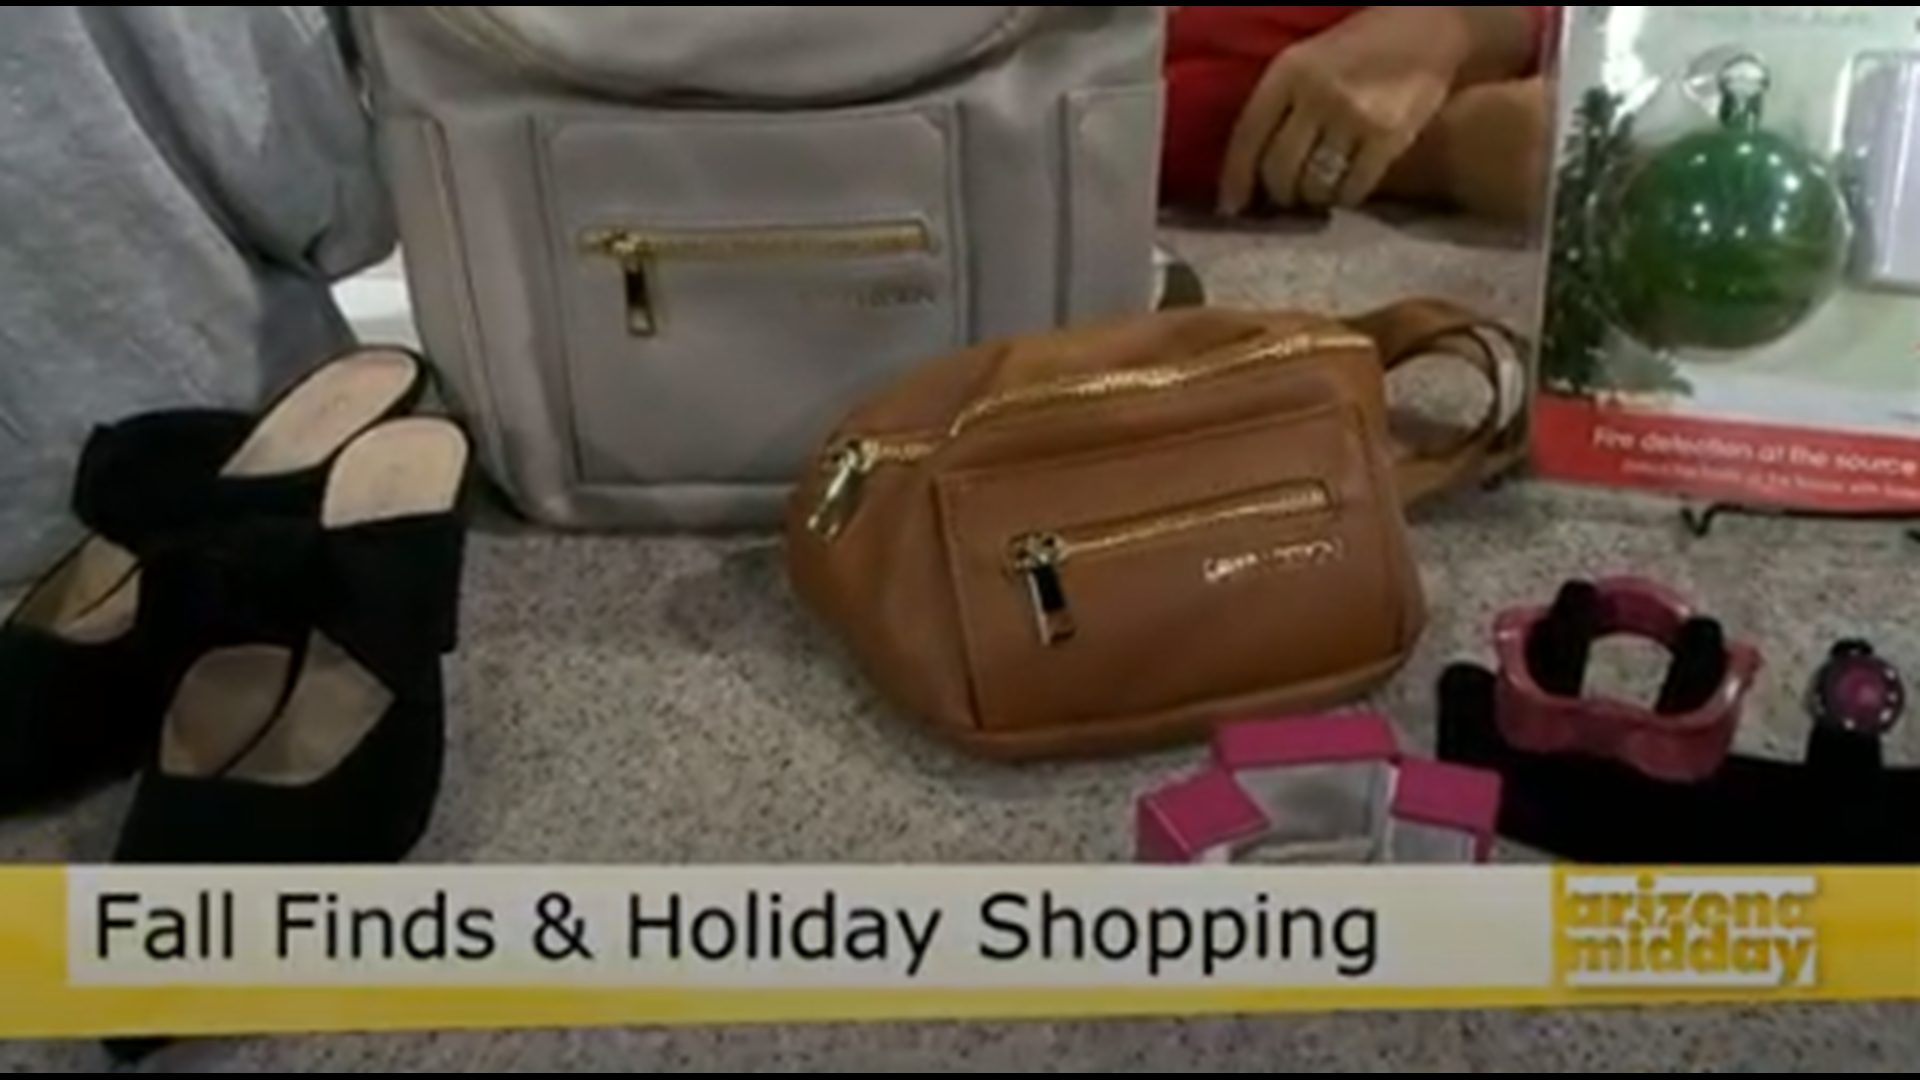 Lifestyle expert Nadine Bubeck shows us all the hot fall items she found and even toys that can be perfect for your kids Christmas list!